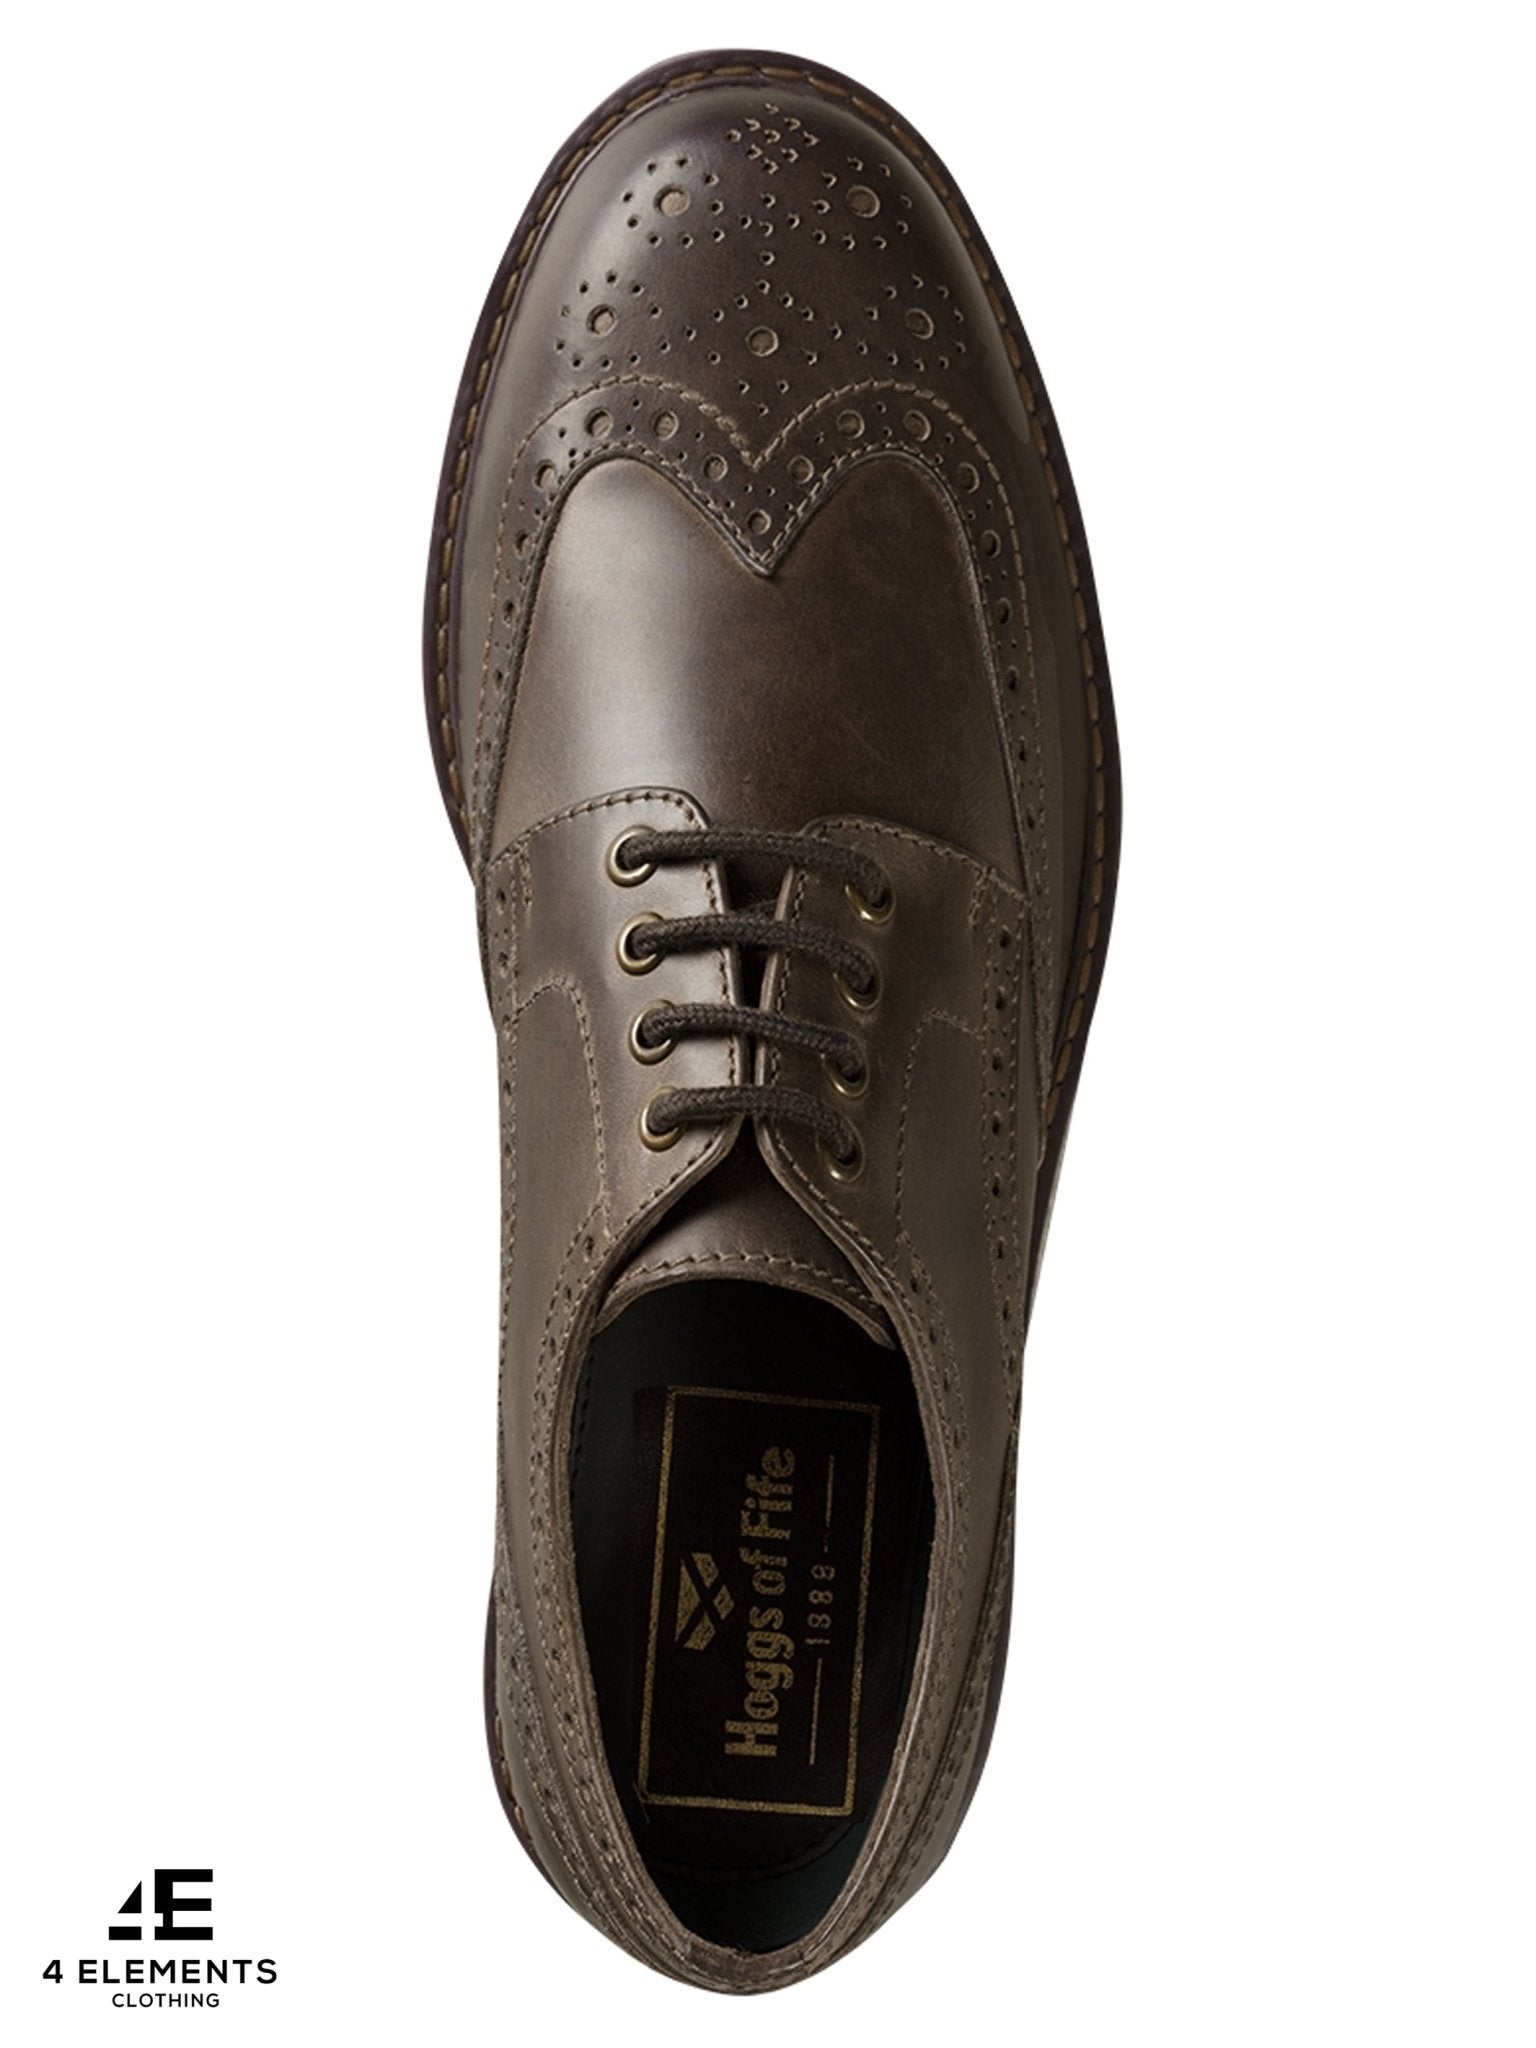 Hoggs of Fife Hoggs of Fife - Mens Brogue Shoe - Inverurie Country Brogue Full grain leather shoe Shoes